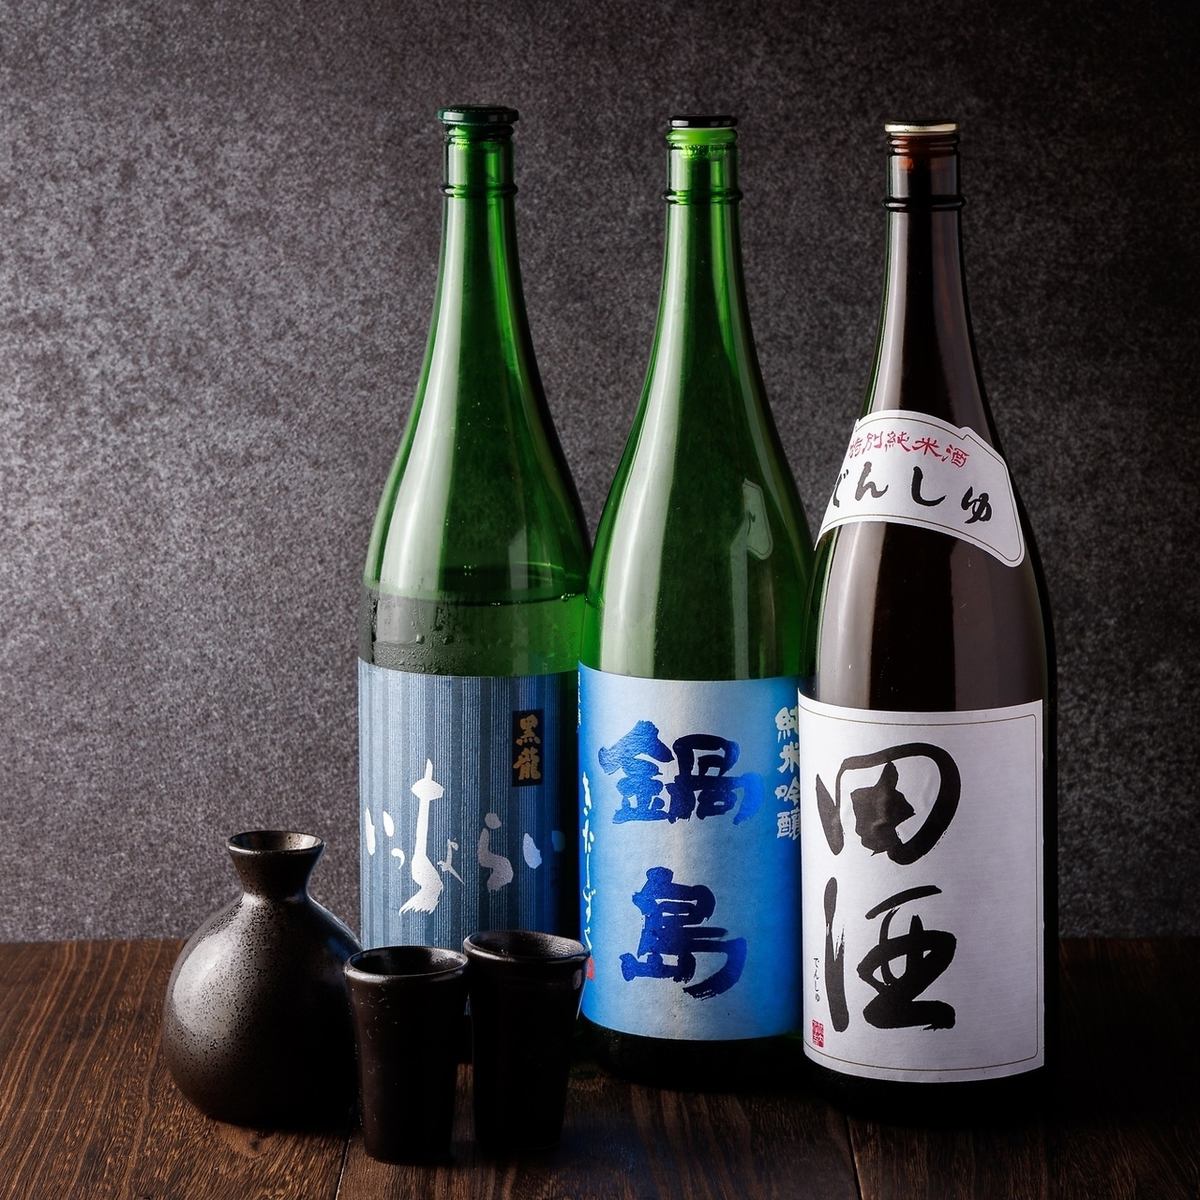 We offer a wide variety of carefully selected Japanese sake.